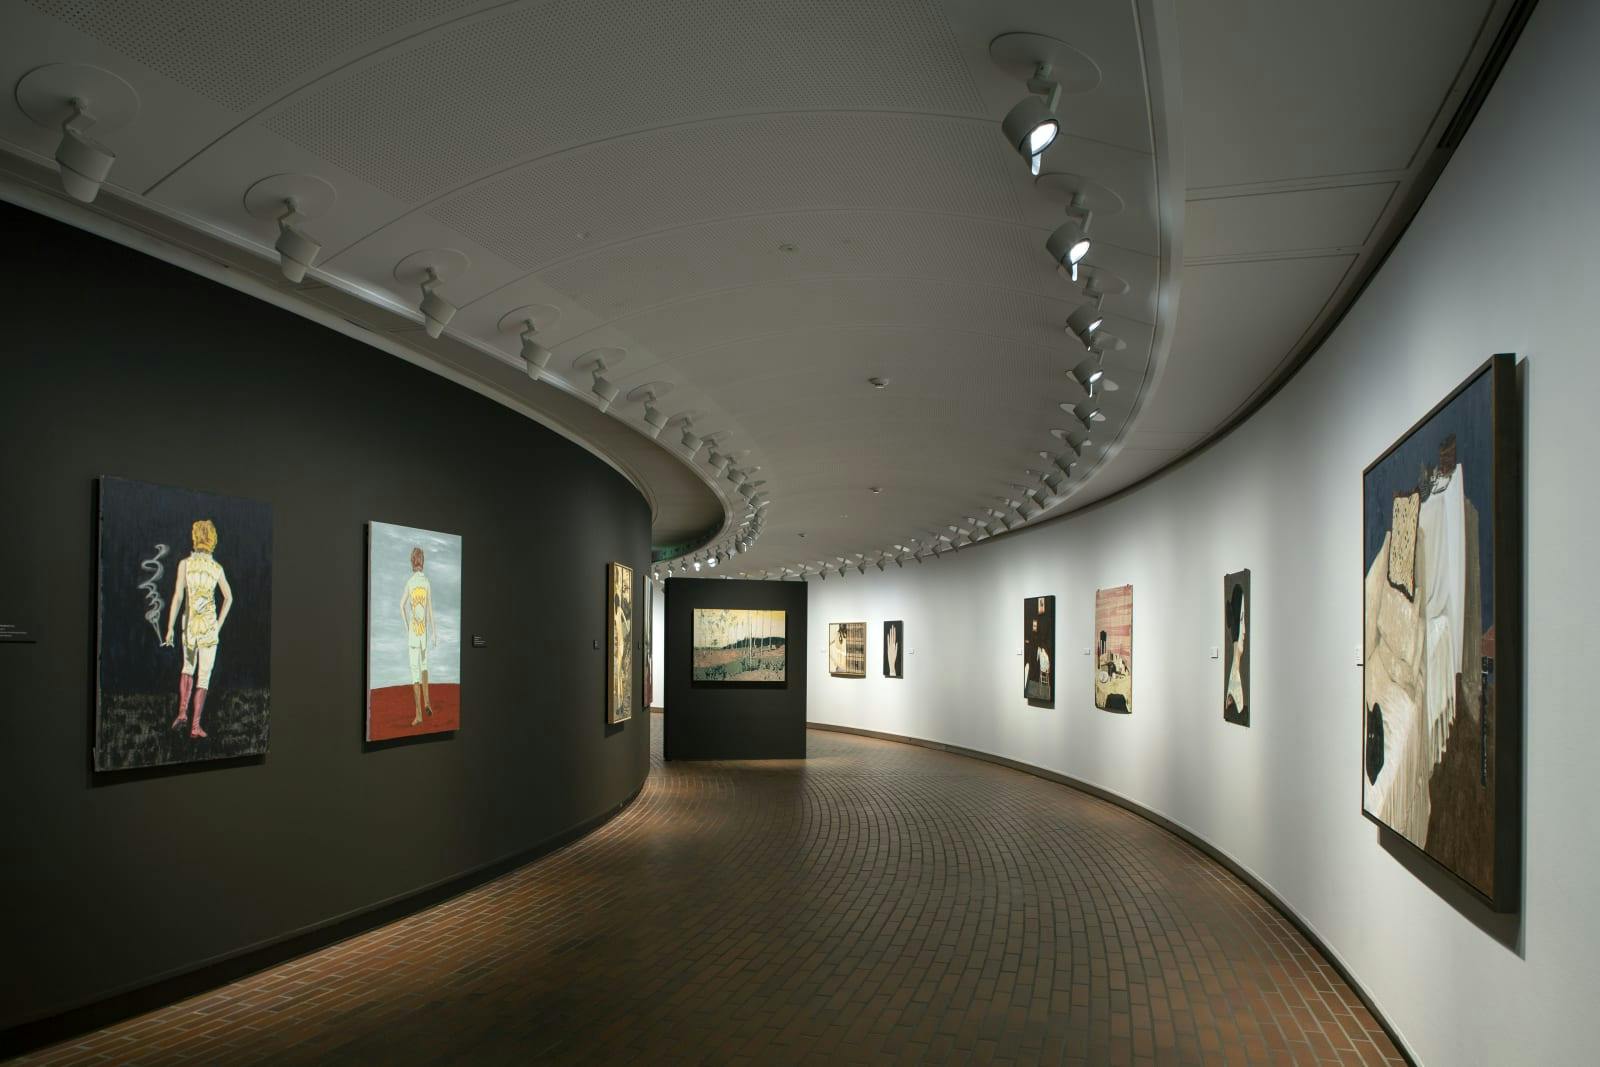 Installation view of the exhibition, Mamma Andersson: Humdrum Days, at Louisiana Museum of Modern Art, in Humlebaek, Denmark, dated 2021.